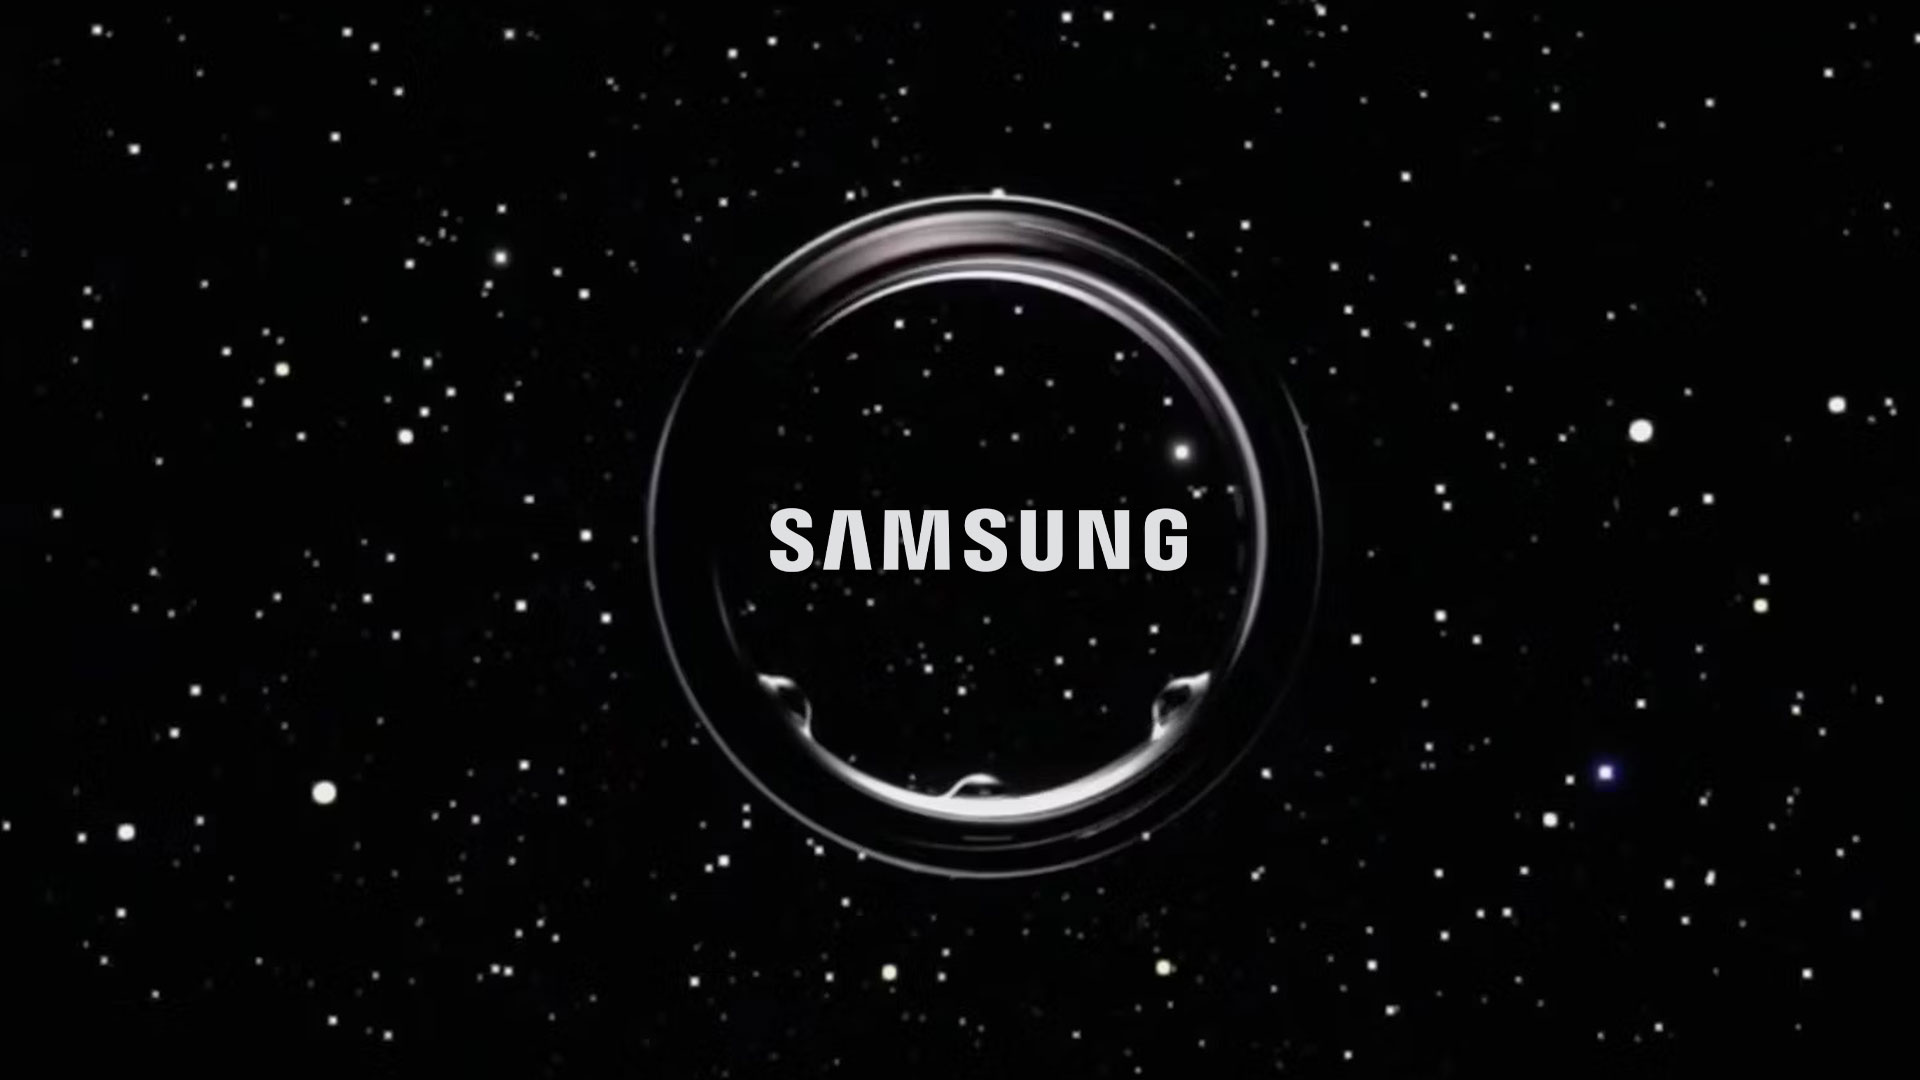 Samsung Galaxy Ring already has its rivals shaking with fear